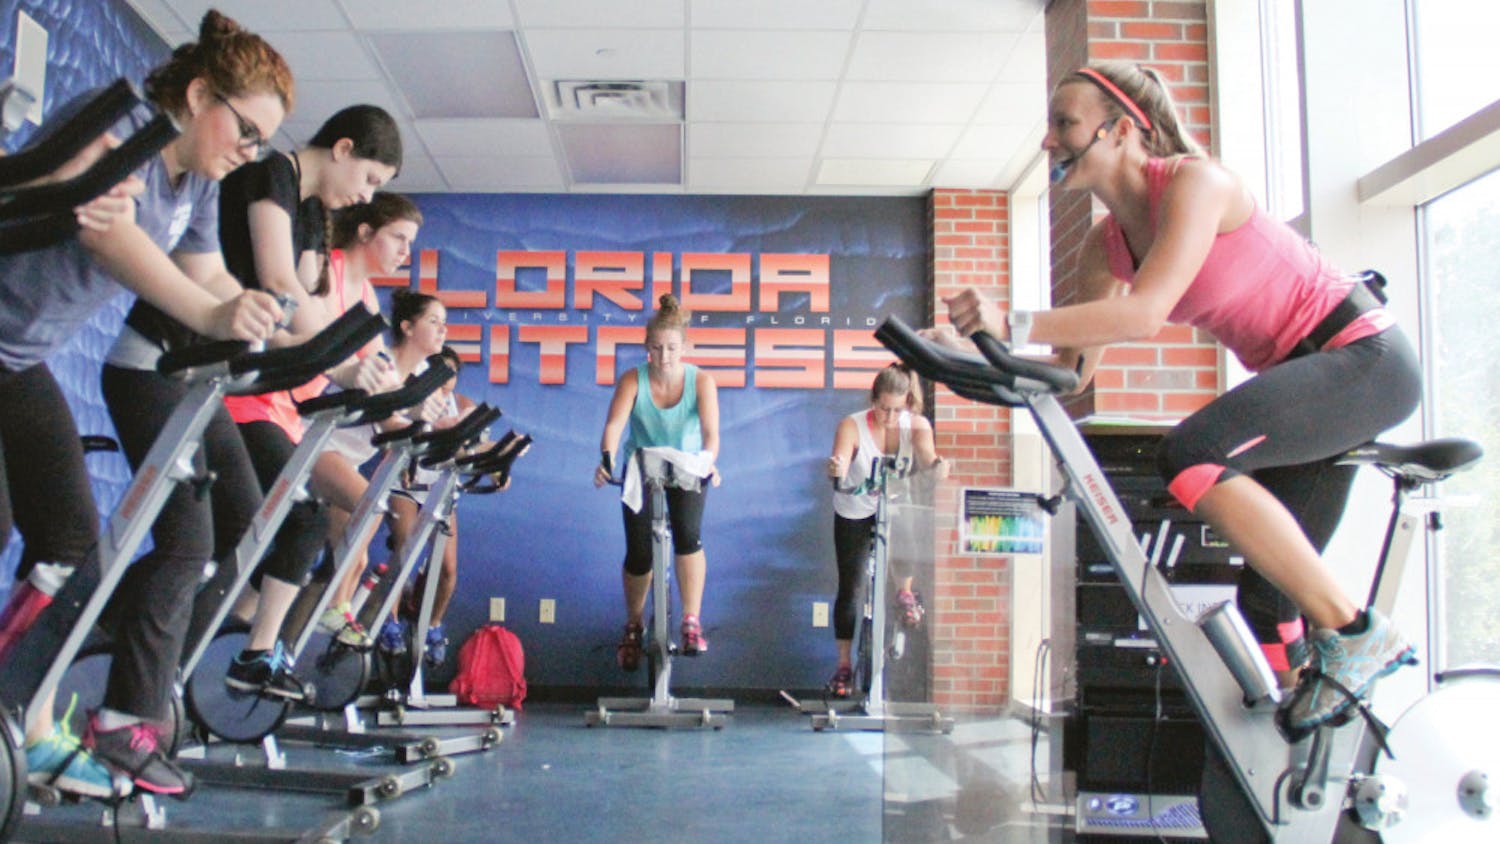 Alyssa Vocelka, a 21-year-old UF accounting senior, leads her Cycle fitness class at the Student Recreation and Fitness Center. Vocelka had Labor Day weekend off and spent it fishing in her hometown of Stuart, Florida. “I caught a giant Snook on the beach,” she said.